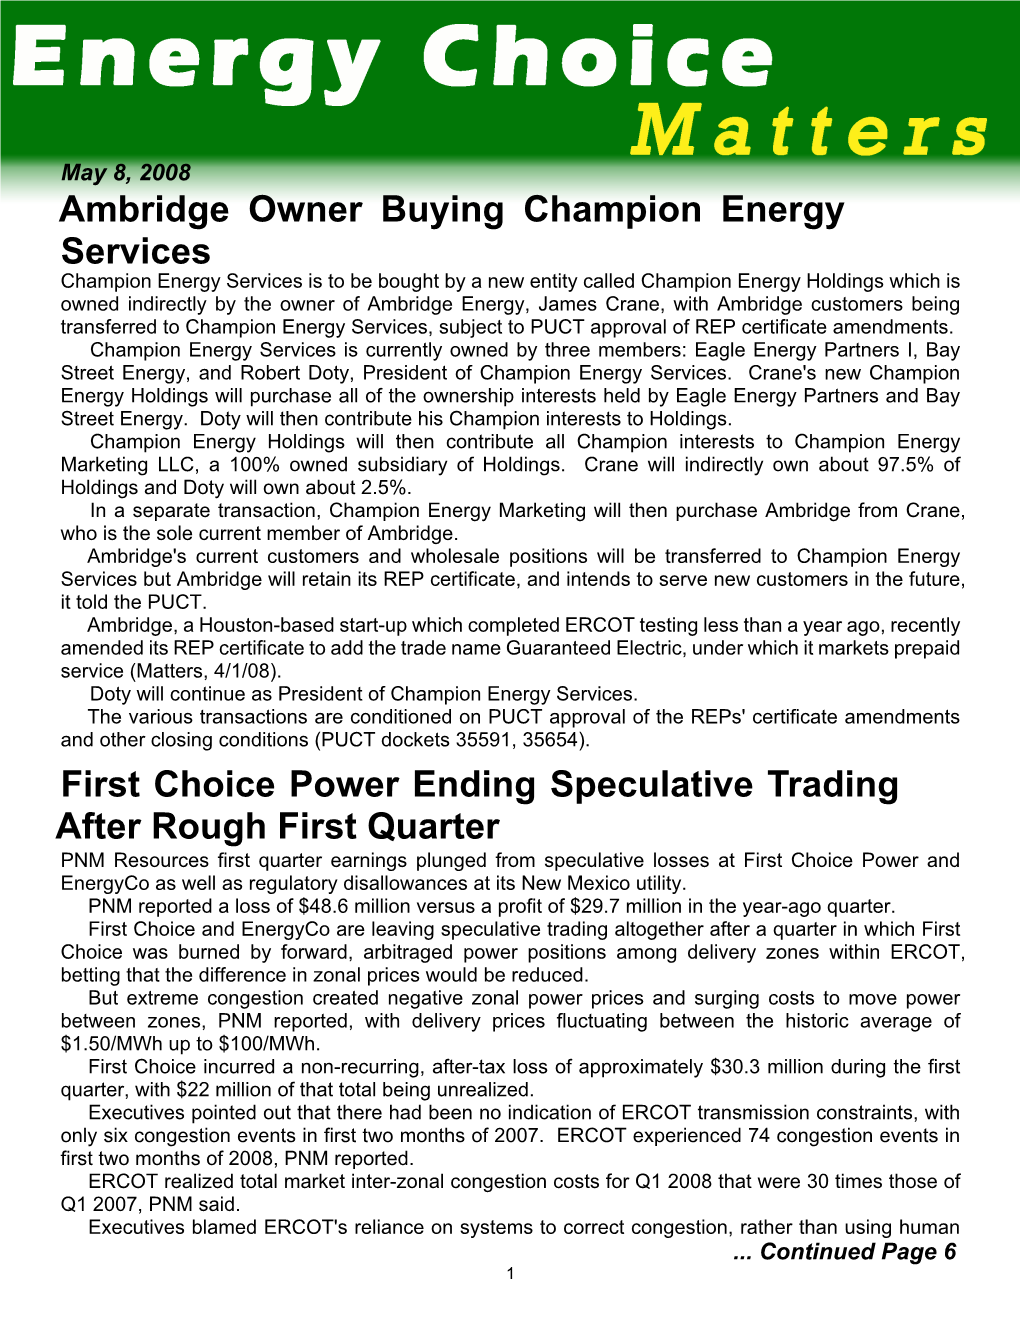 Ambridge Owner Buying Champion Energy Services First Choice Power